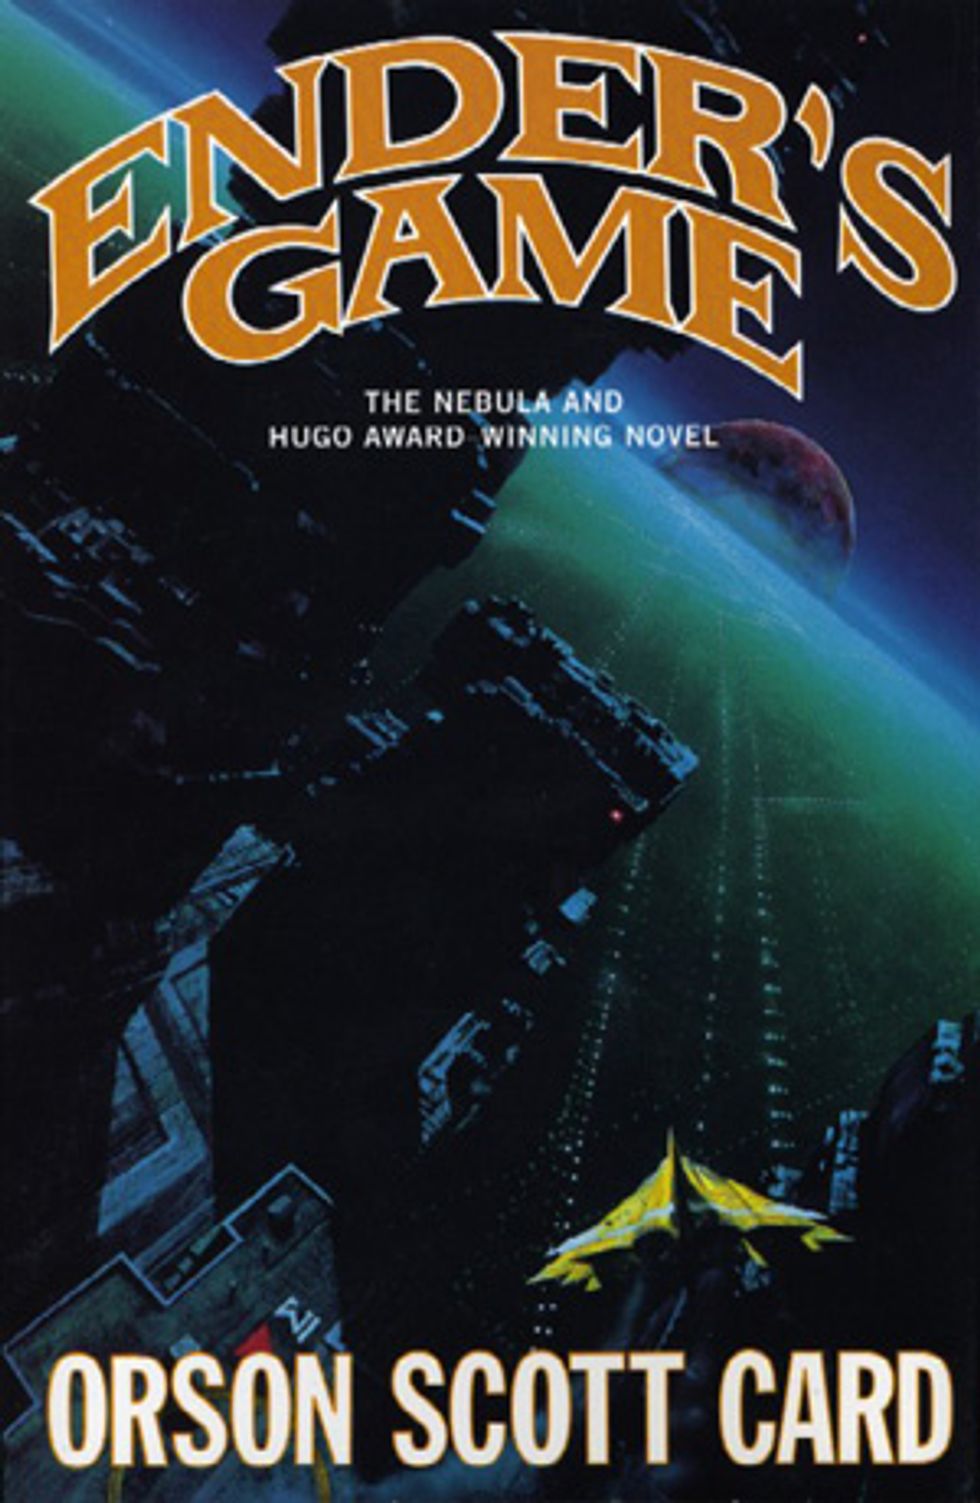 marine corps book report ender's game